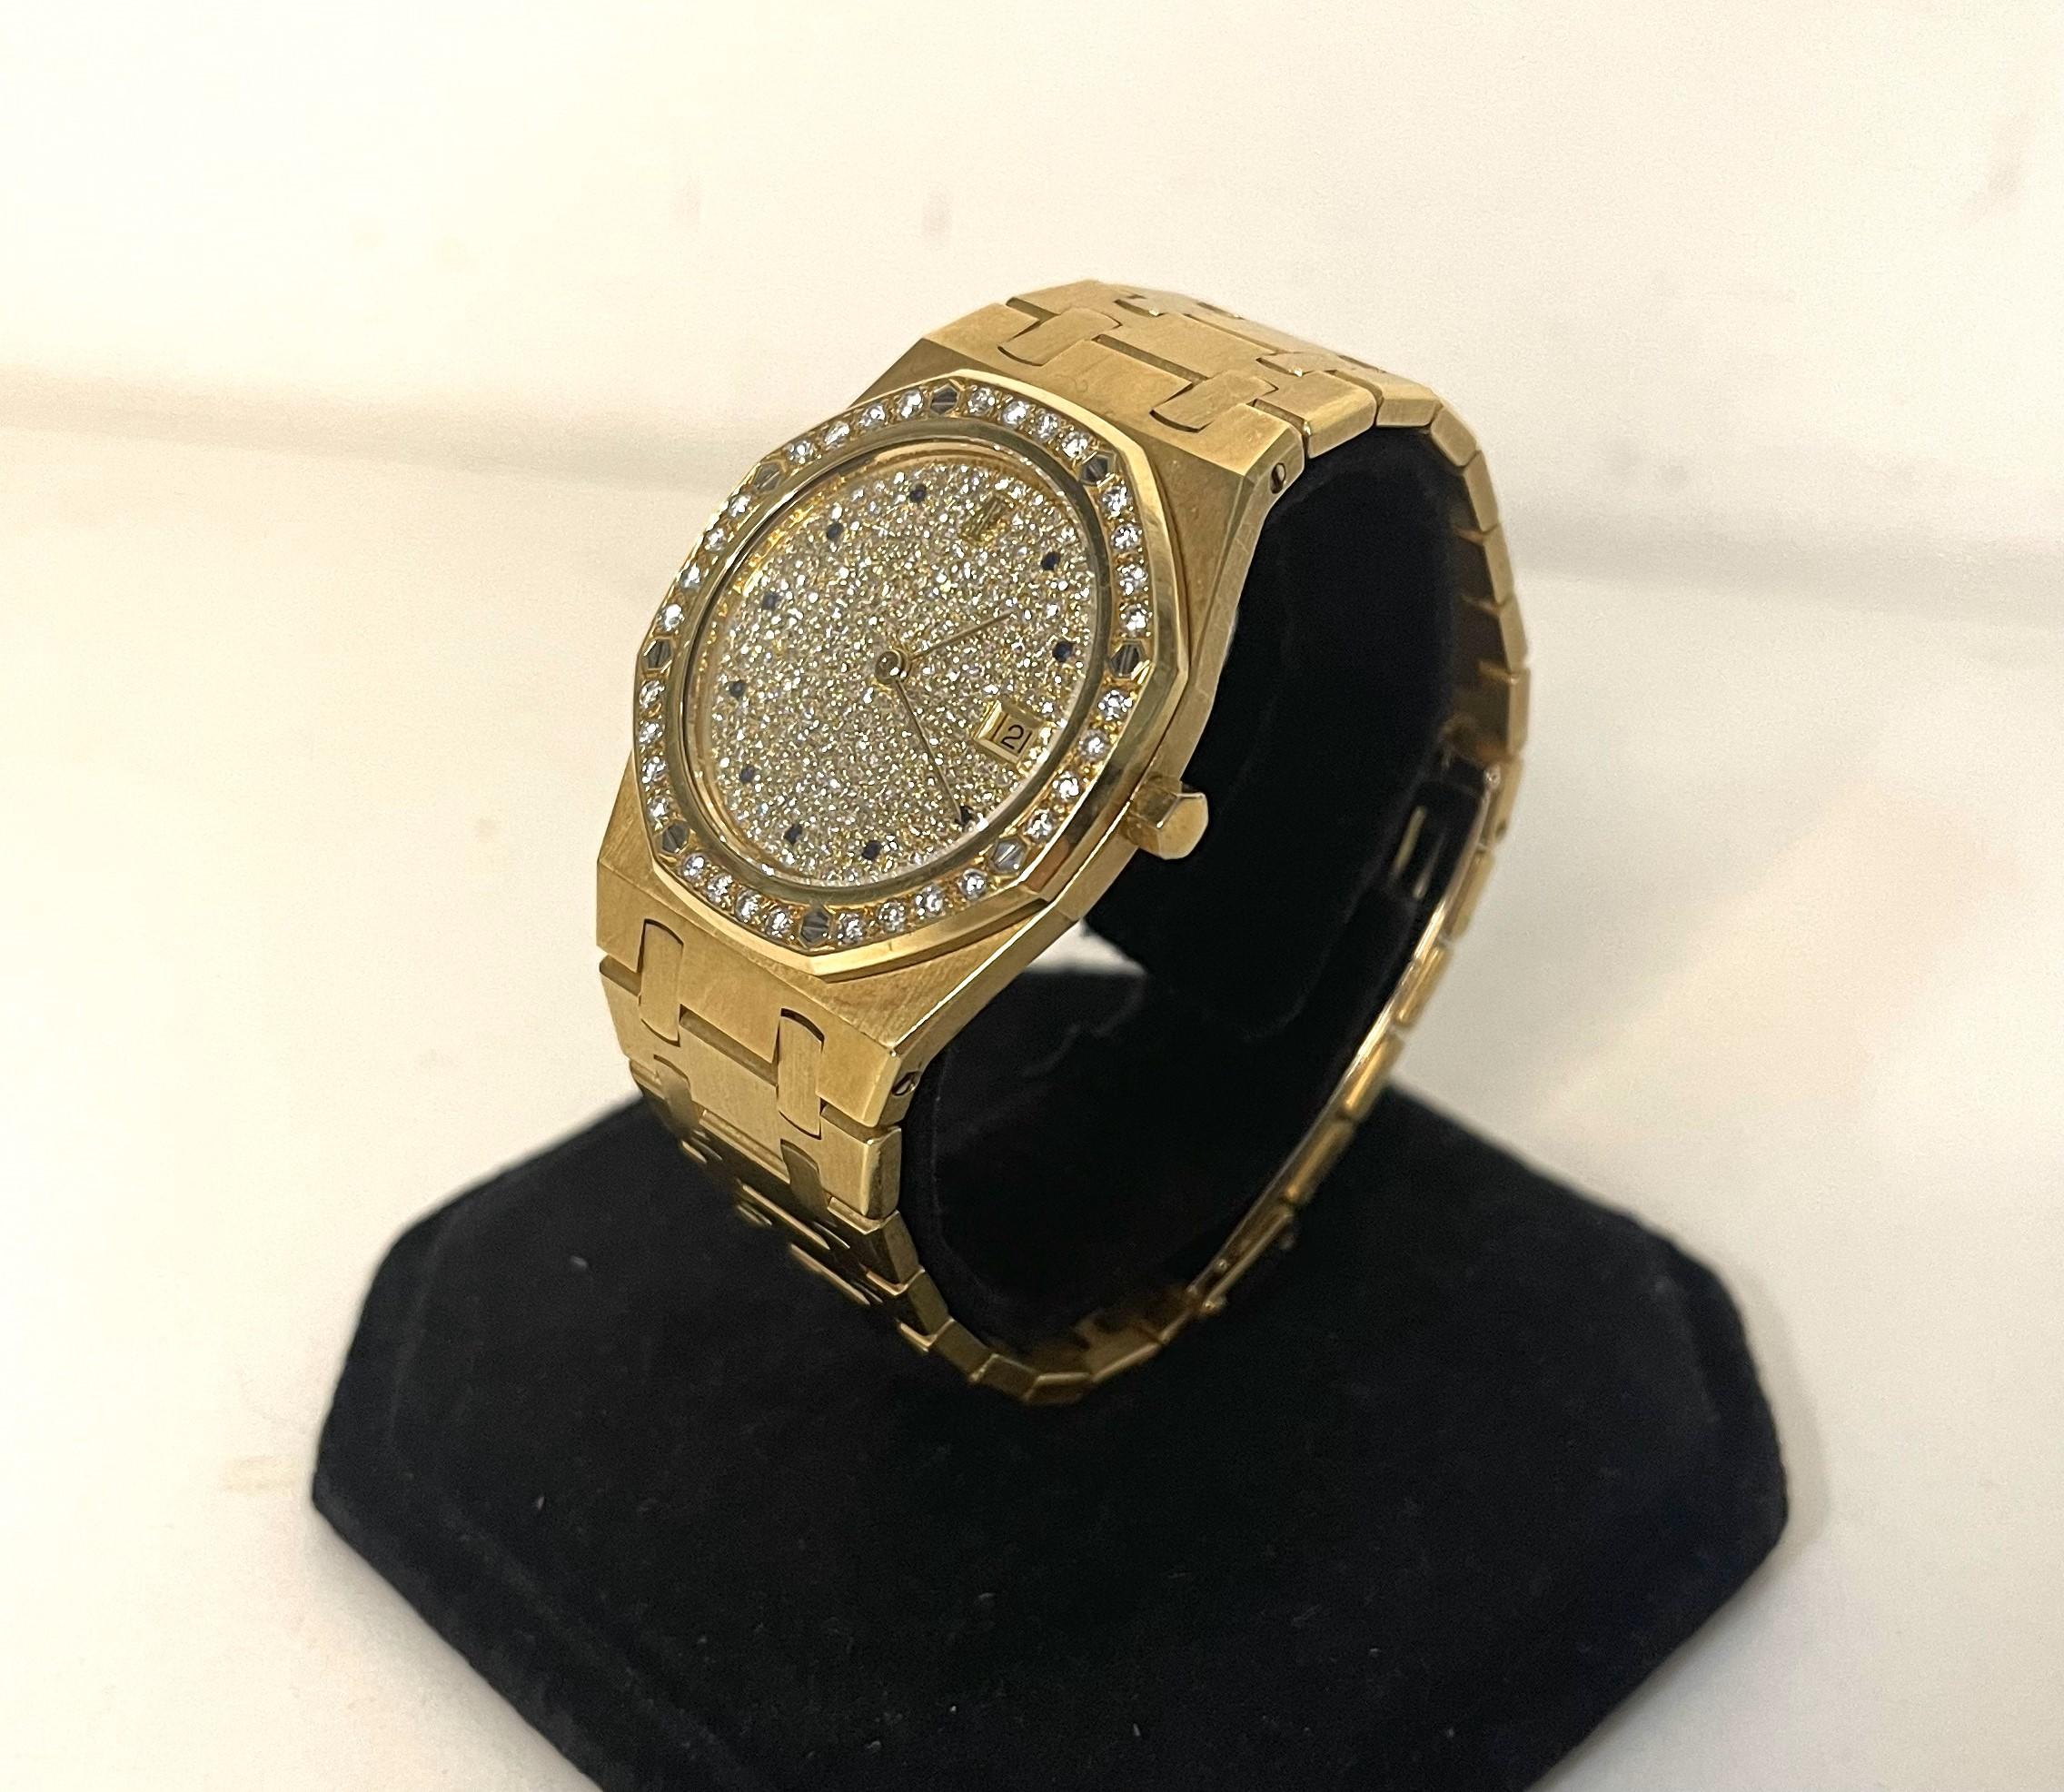 AUDEMARS PIGUET ROYAL OAK 18K YG WATCH W/RARE DIAMOND&SAPPHIRE DIAL

ITEM DESCRIPTION: 
With Swiss construction and Audemars Piguet distinction, this Royal Oak Offshore 18K Yellow Gold and Stainless Steel wristwatch keeps impeccable time and style.